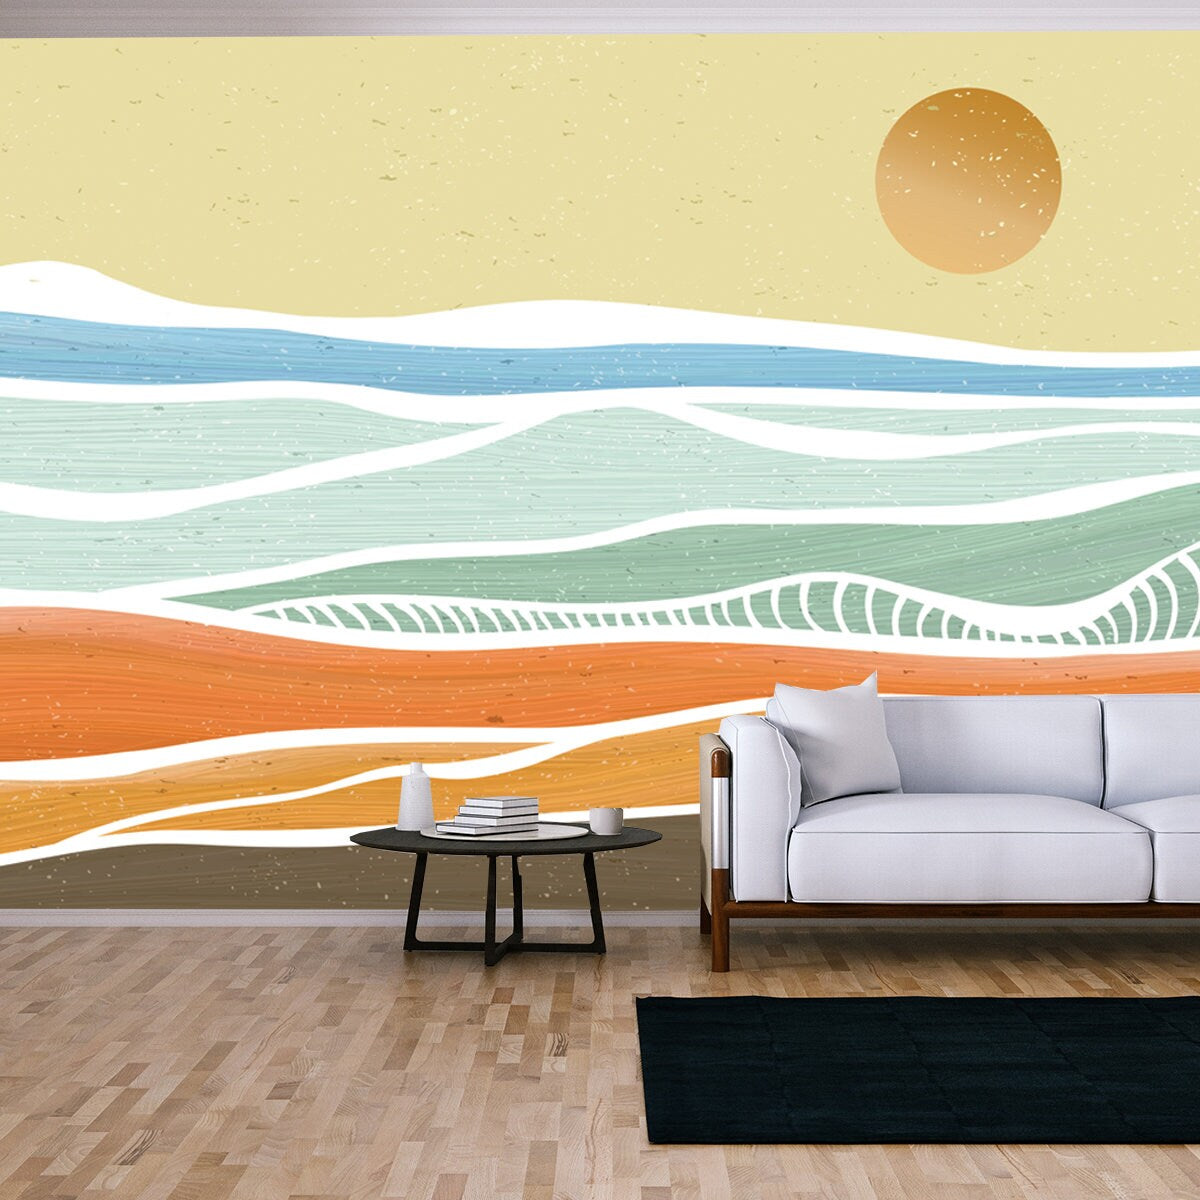 Creative Minimalist Modern Paint and Line Art Print. Abstract Ocean Wave and Mountain Contemporary Aesthetic Wallpaper Living Room Mural